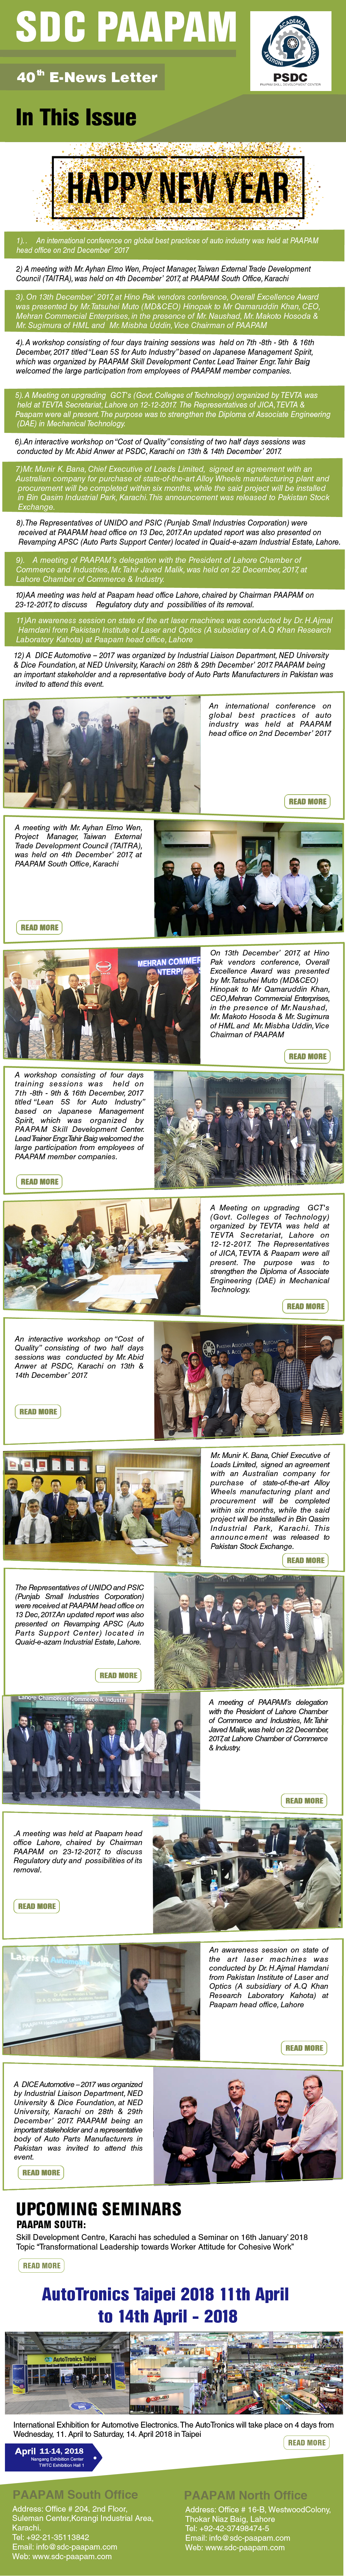 SDC PAAPAM eNewsletter, Issue 39